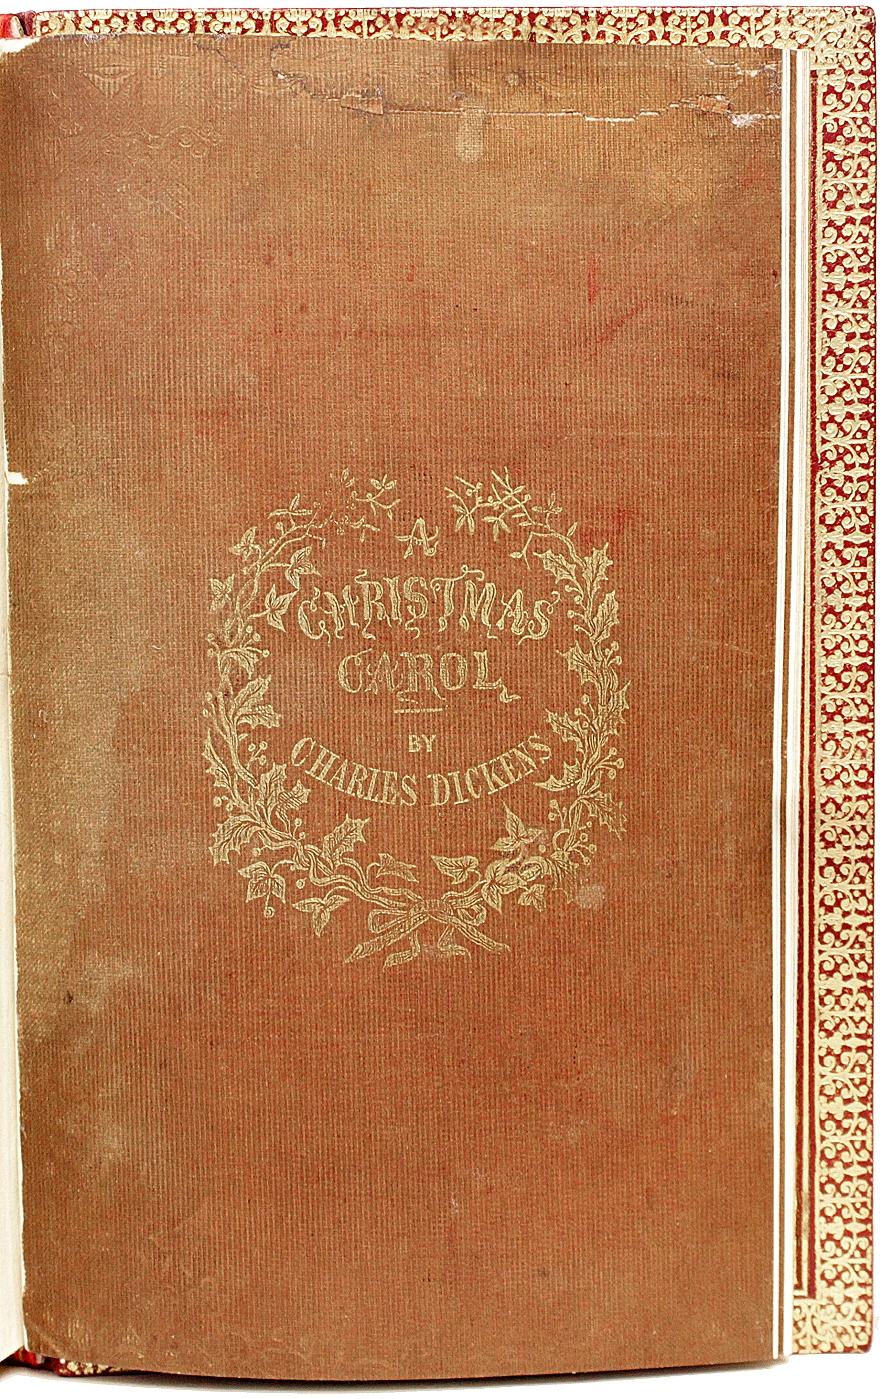 Charles Dickens, a Christmas Carol, 1843, First Edition, First Issue 1